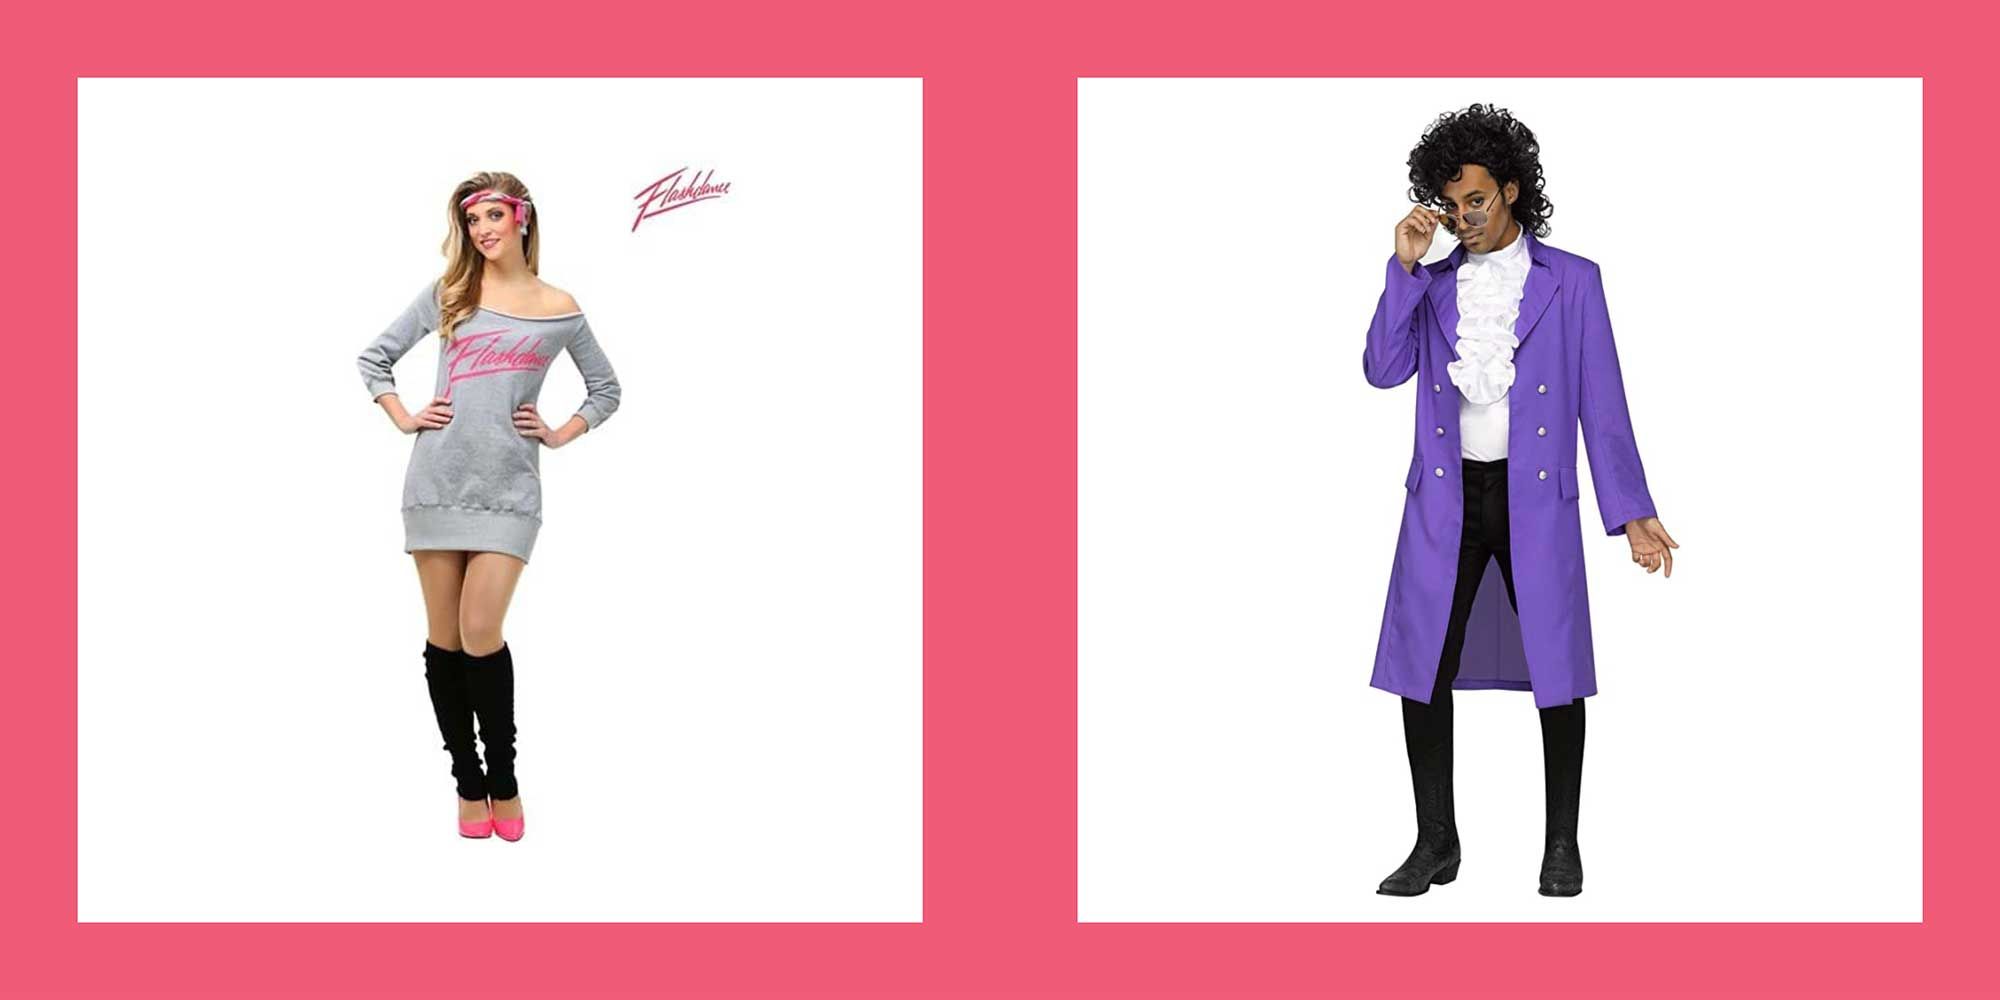 80s Costumes for Women and Kids, Plus Size 80s Halloween Costumes